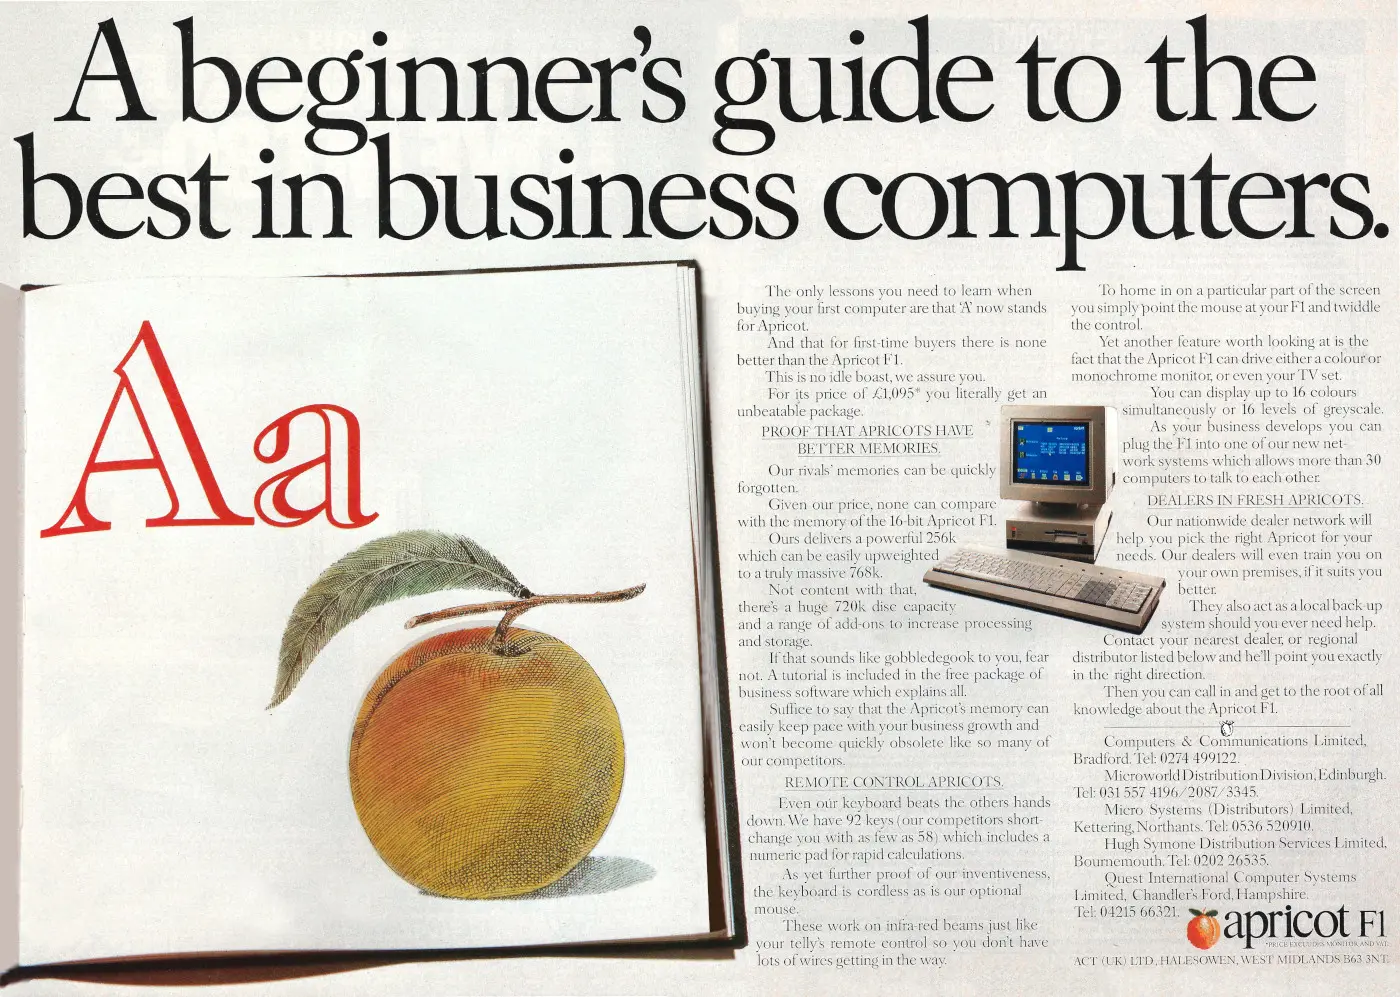 ACT/Apricot Advert: A beginner's guide to the best in business computers, from Personal Computer World, April 1985